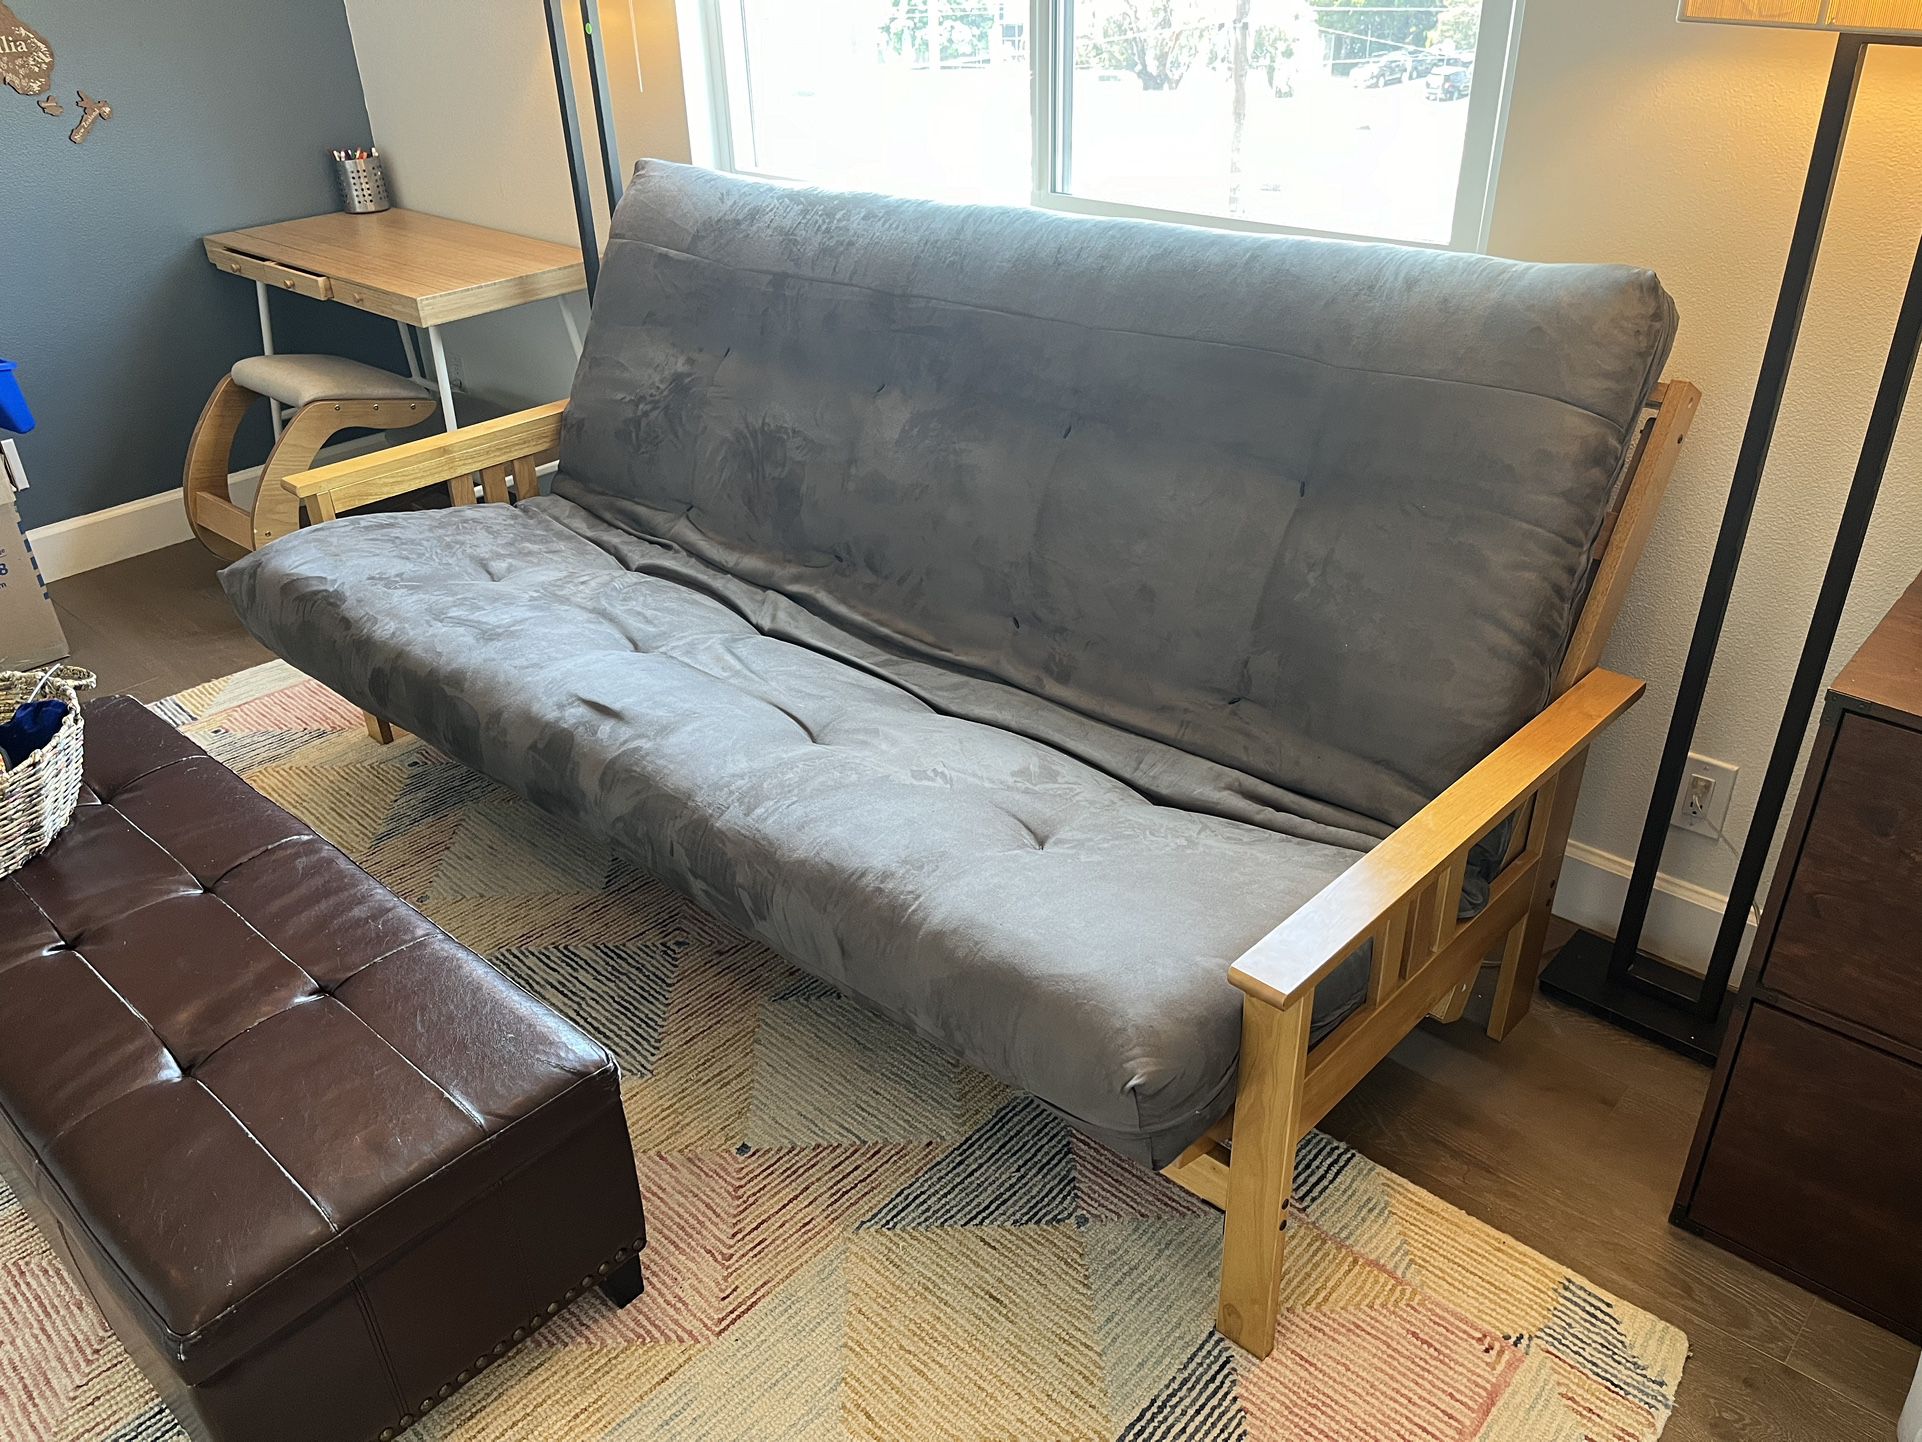 Durable Futon Couch / Queen Bed